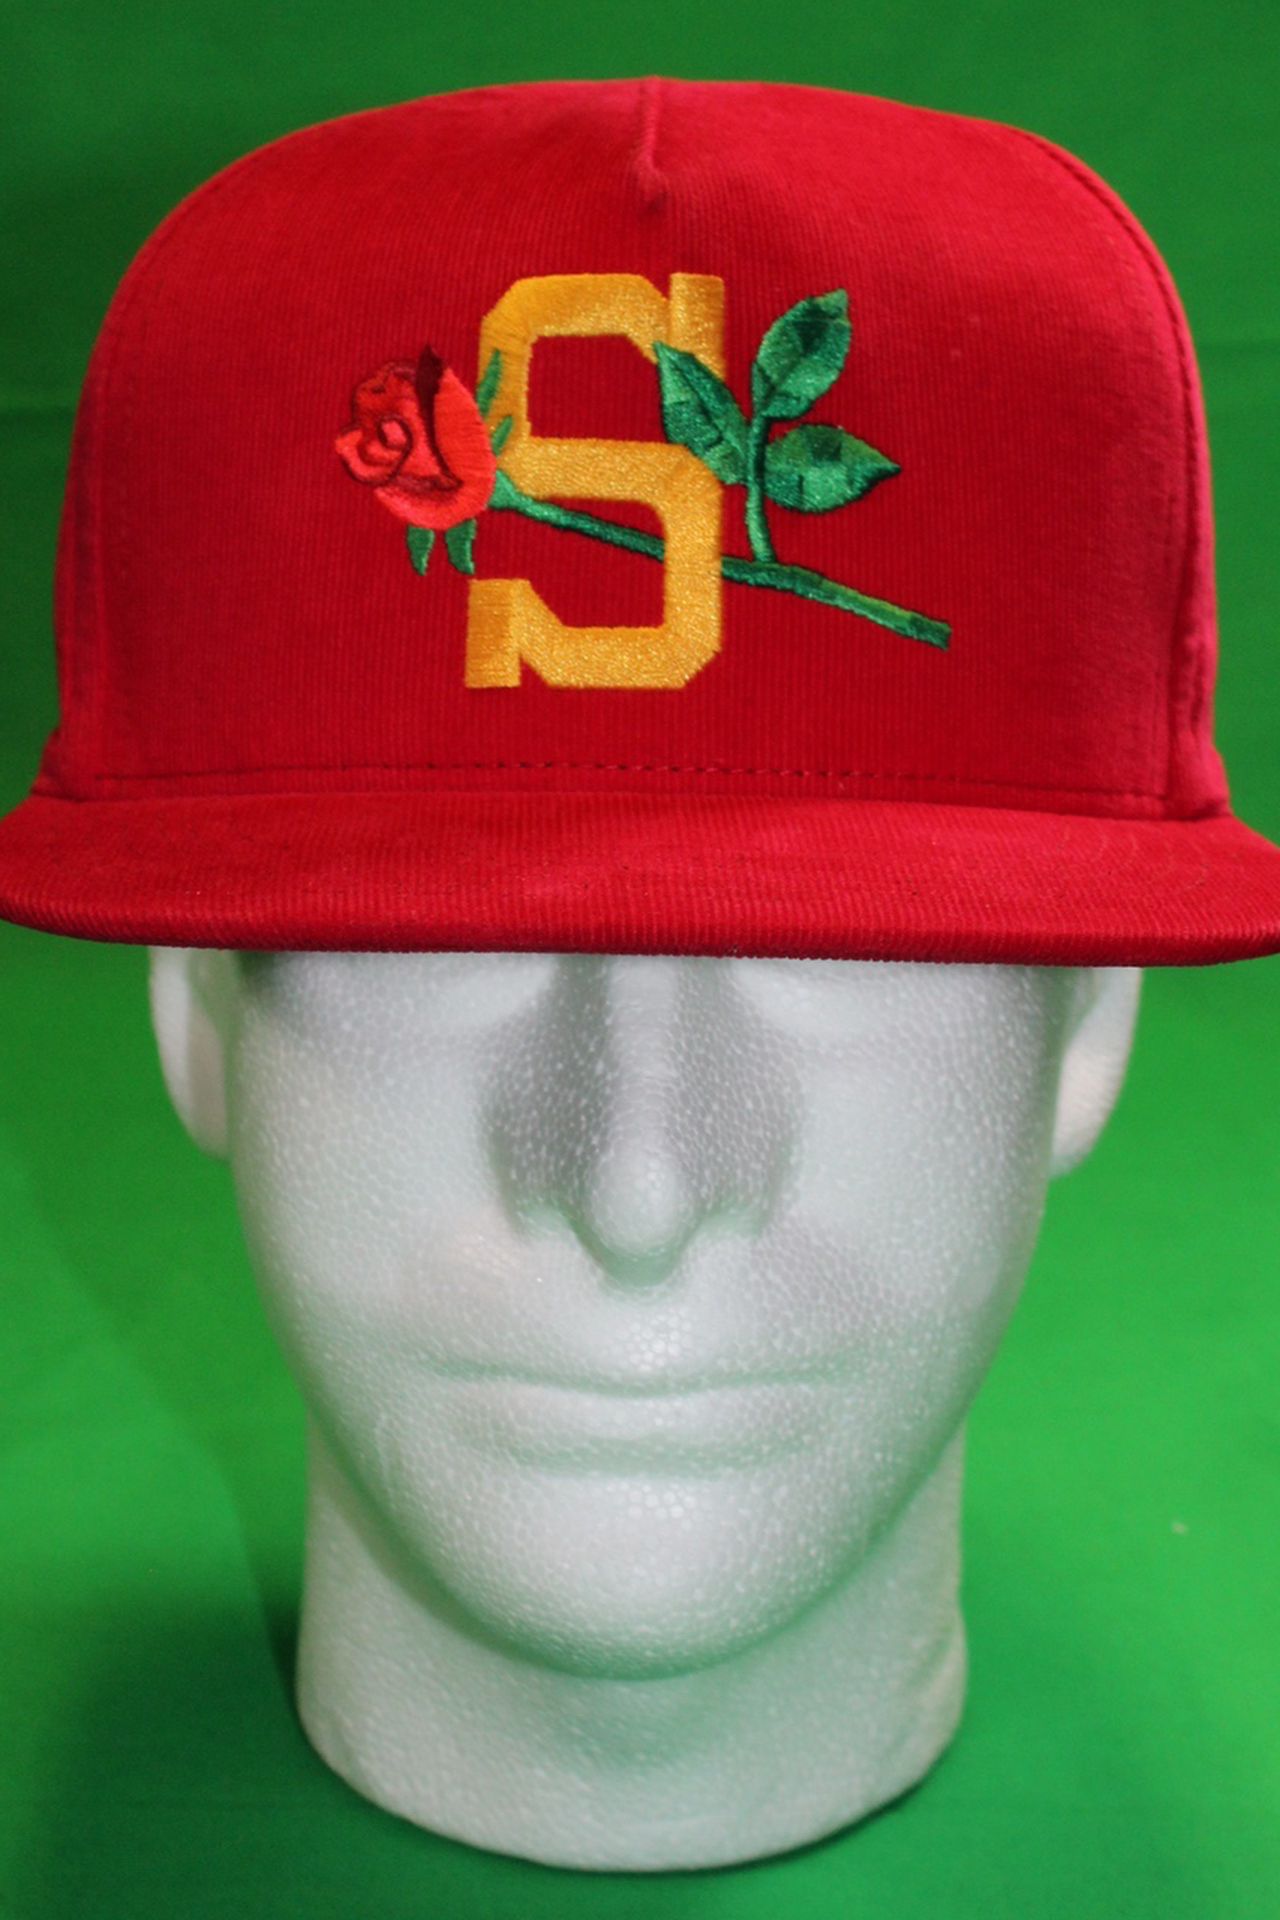 Supreme Rose Hat Corduroy Hat Red SnapBack SS15 New York NEW!